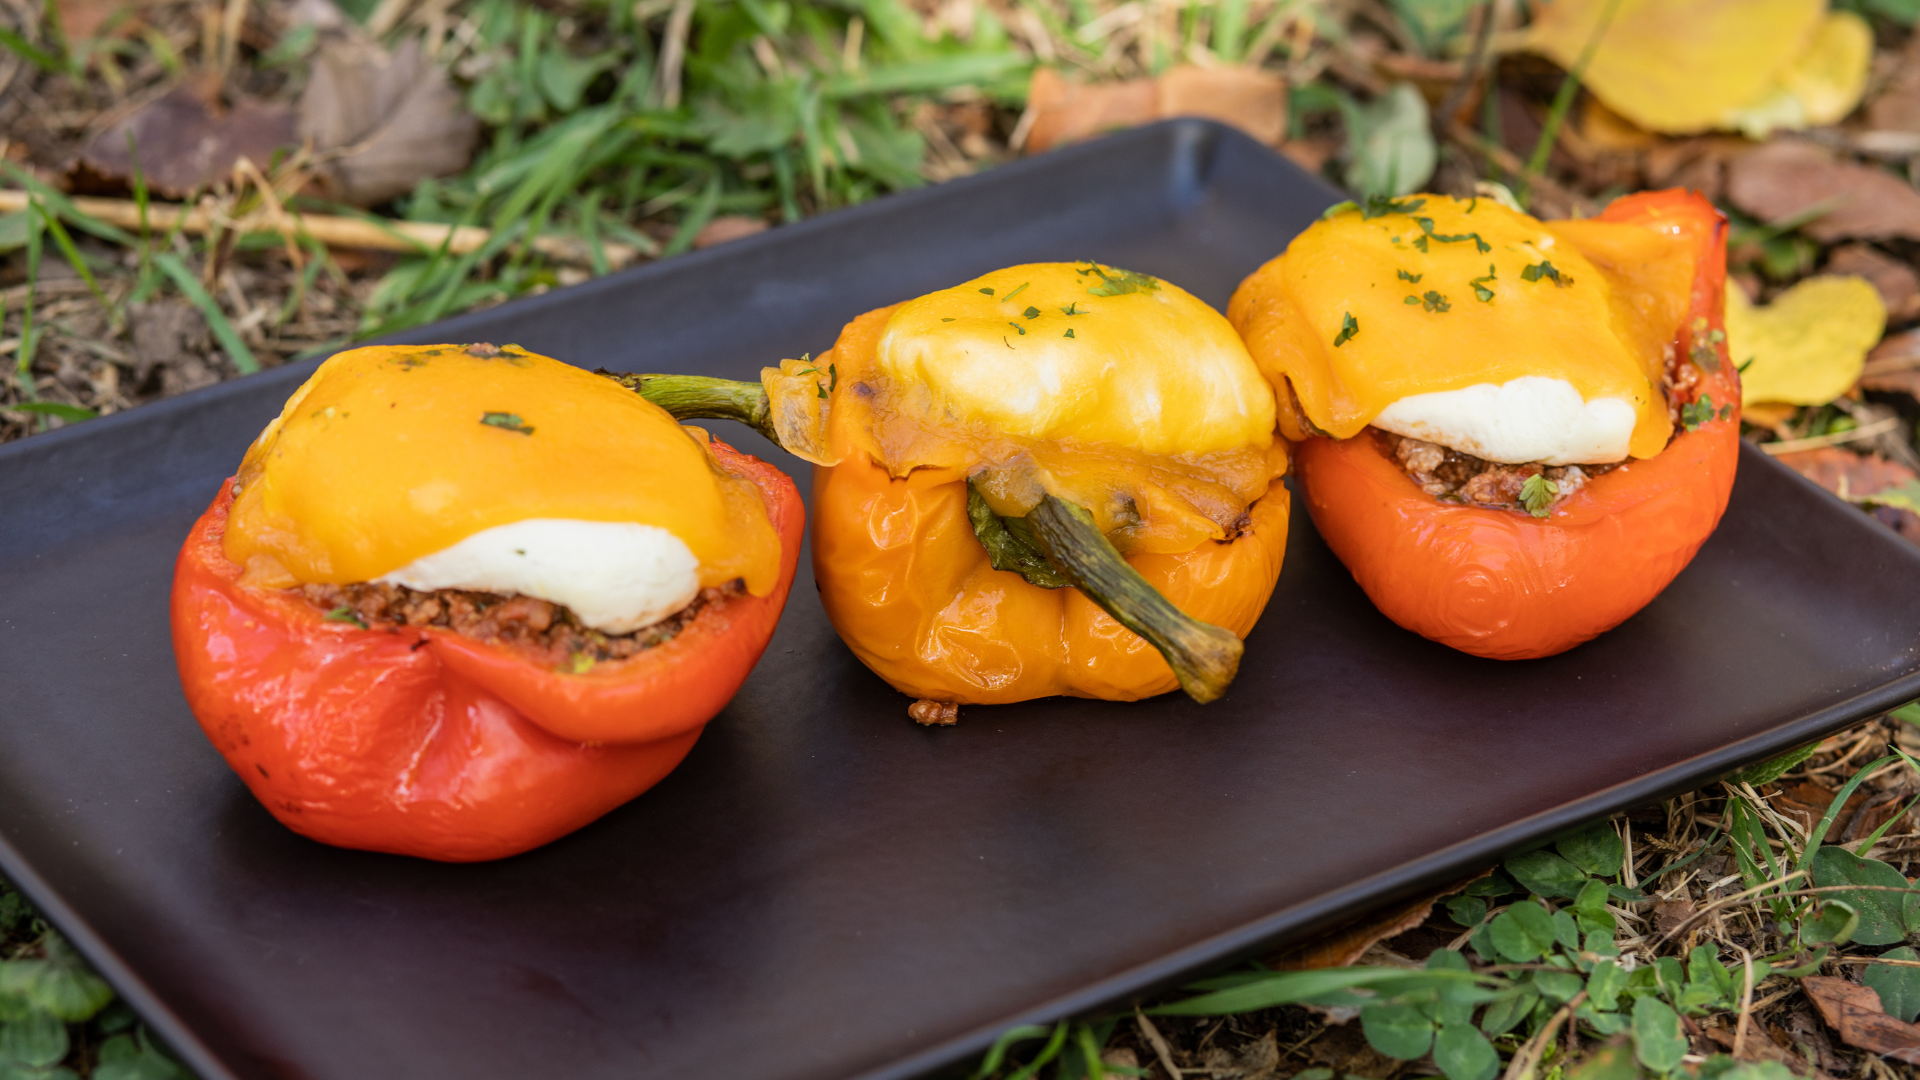 Savory Beef-Stuffed Peppers with Poached Eggs & Creamy Cheese Sauce